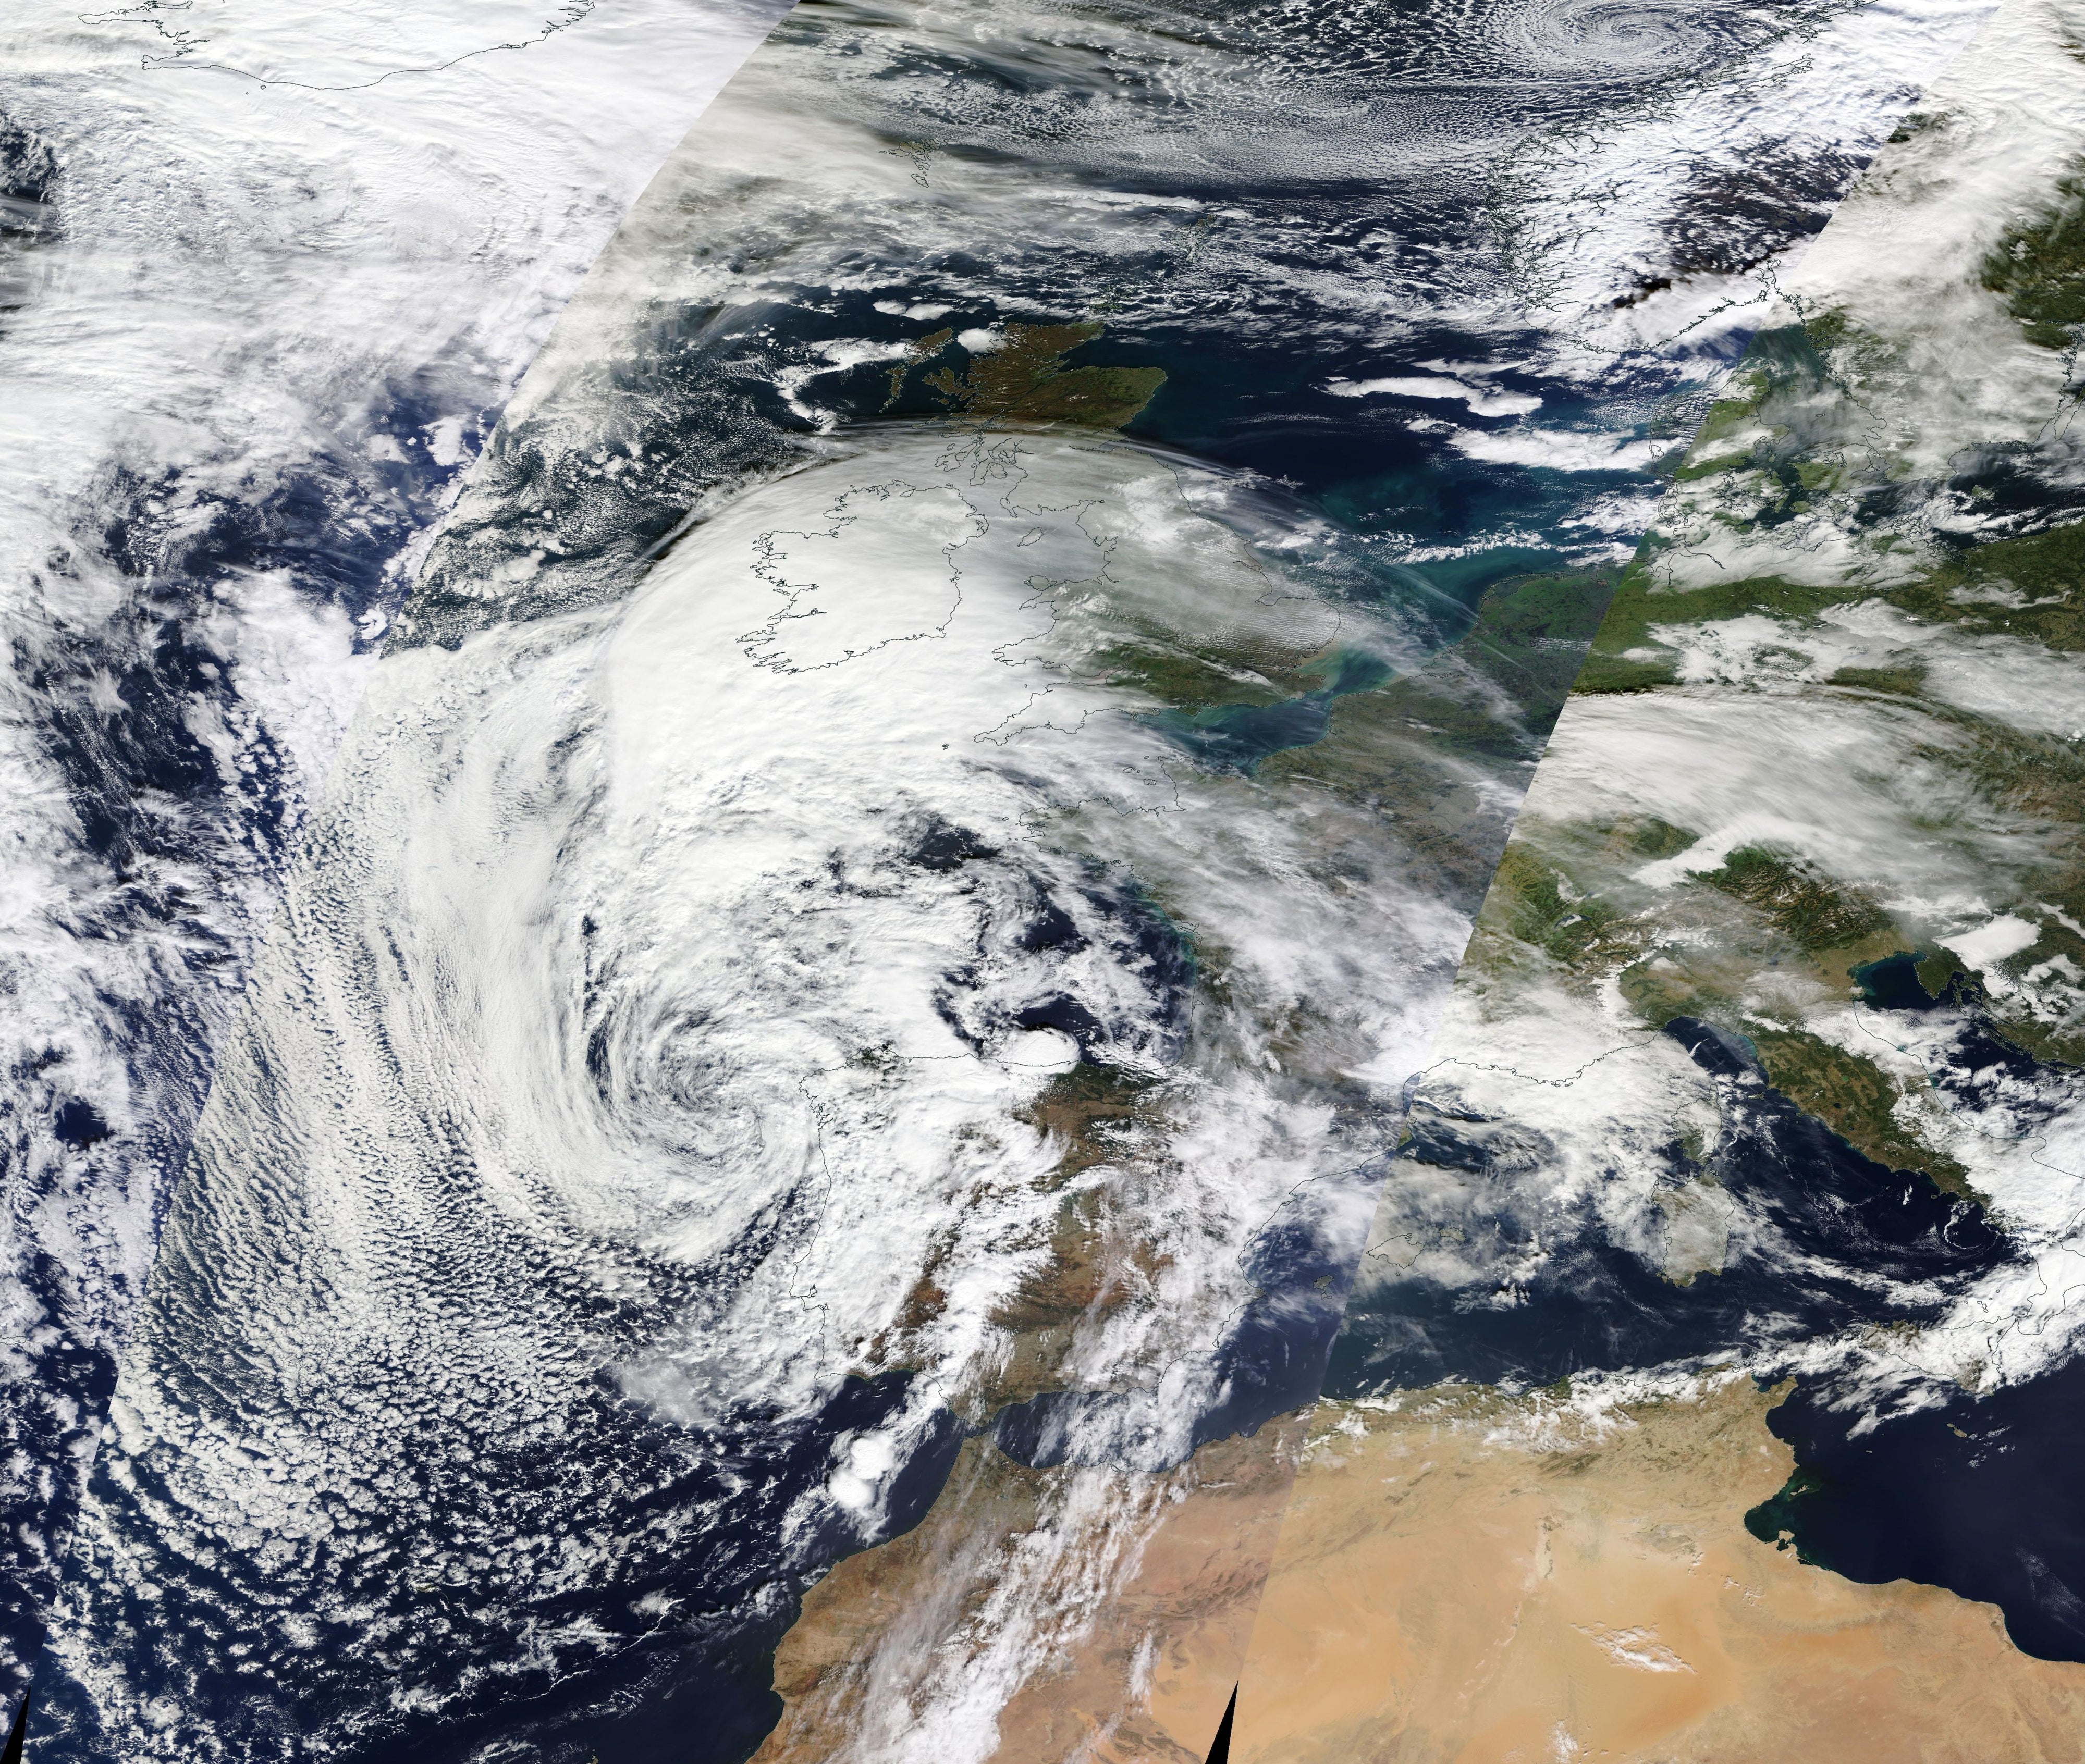 The UK is braced for Storm Babet to hit this week